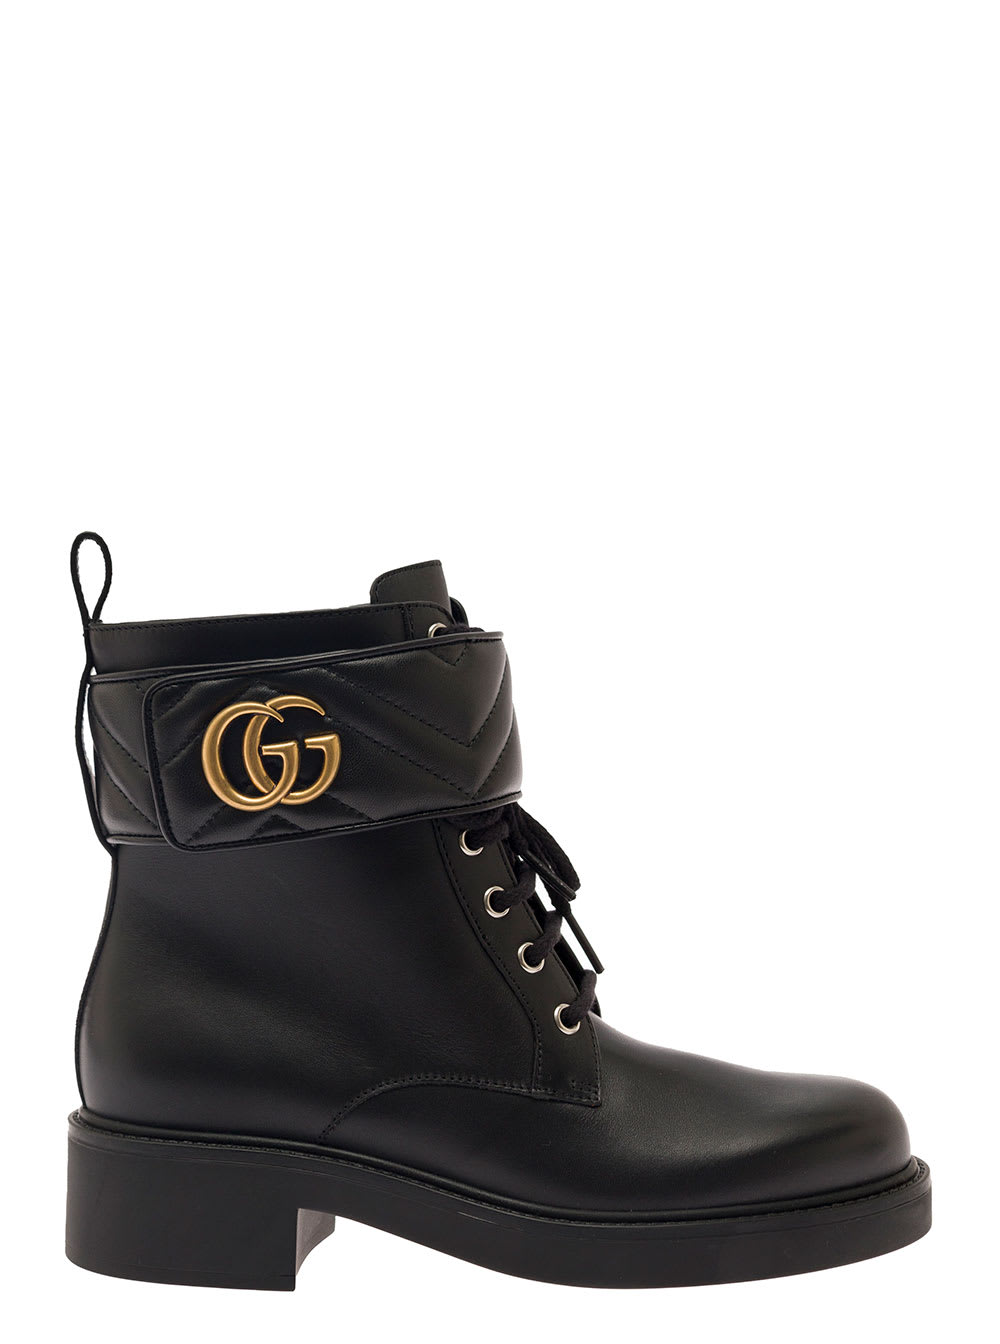 Black Ankle Boot With Double g And Textured Hardware In Leather Woman